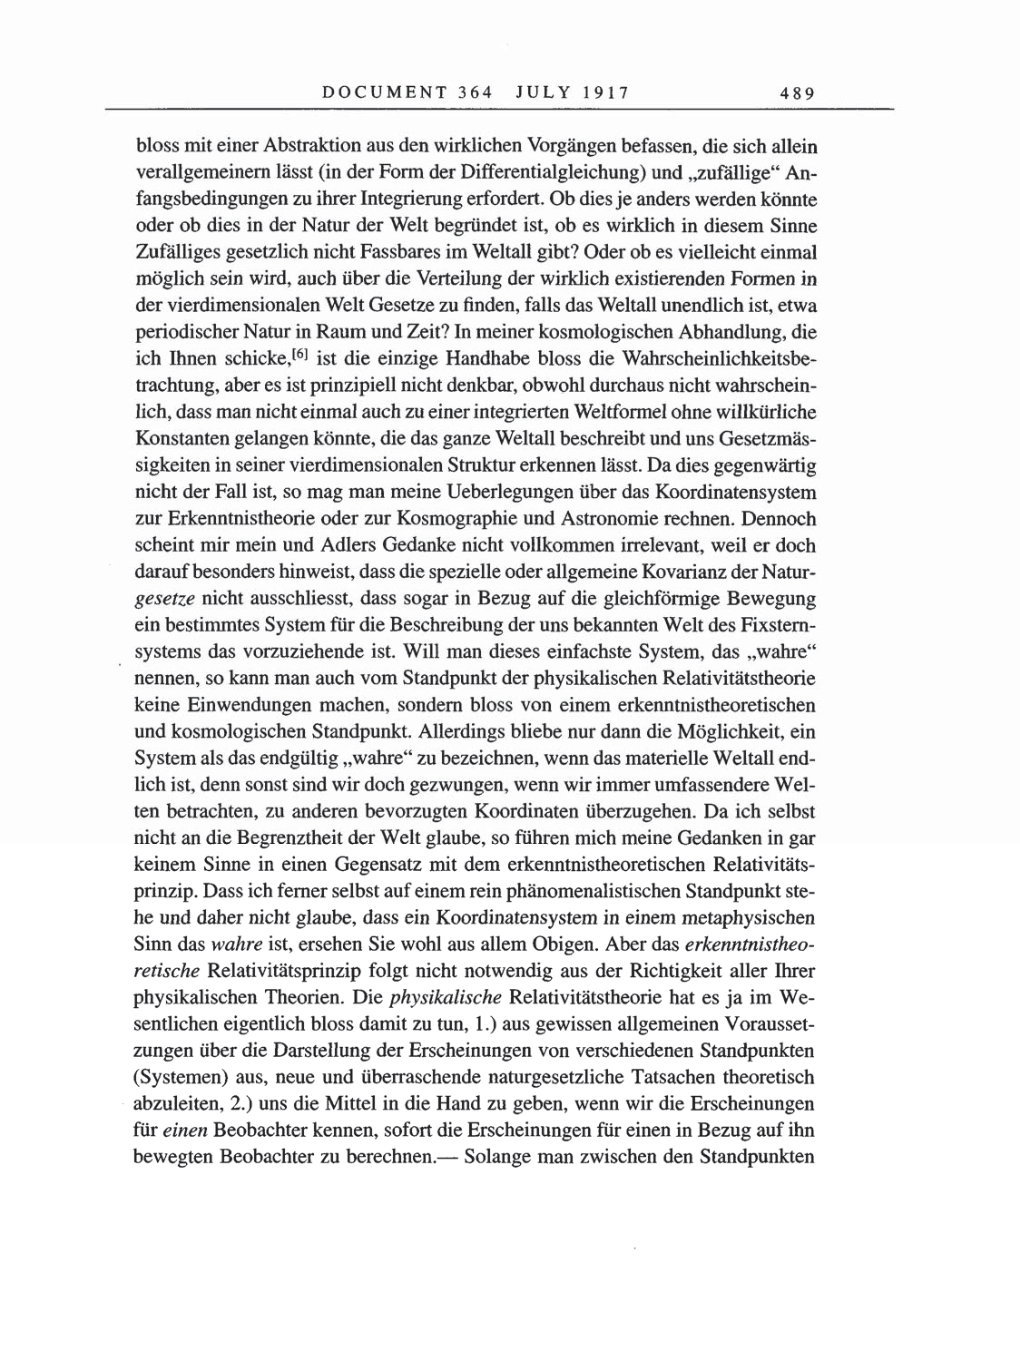 Volume 8, Part A: The Berlin Years: Correspondence 1914-1917 page 489